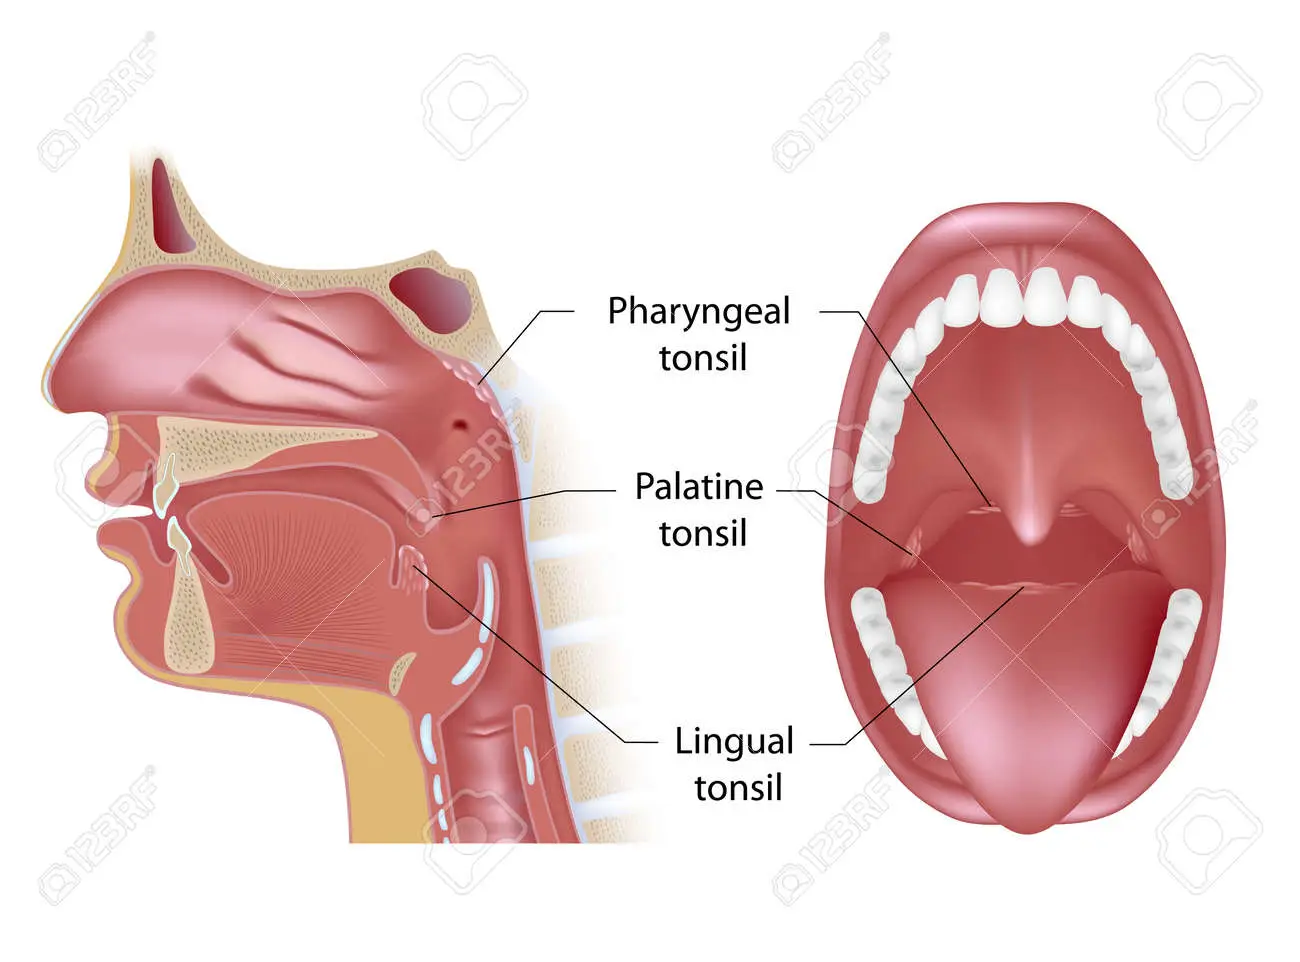 Tonsils in open mouth and